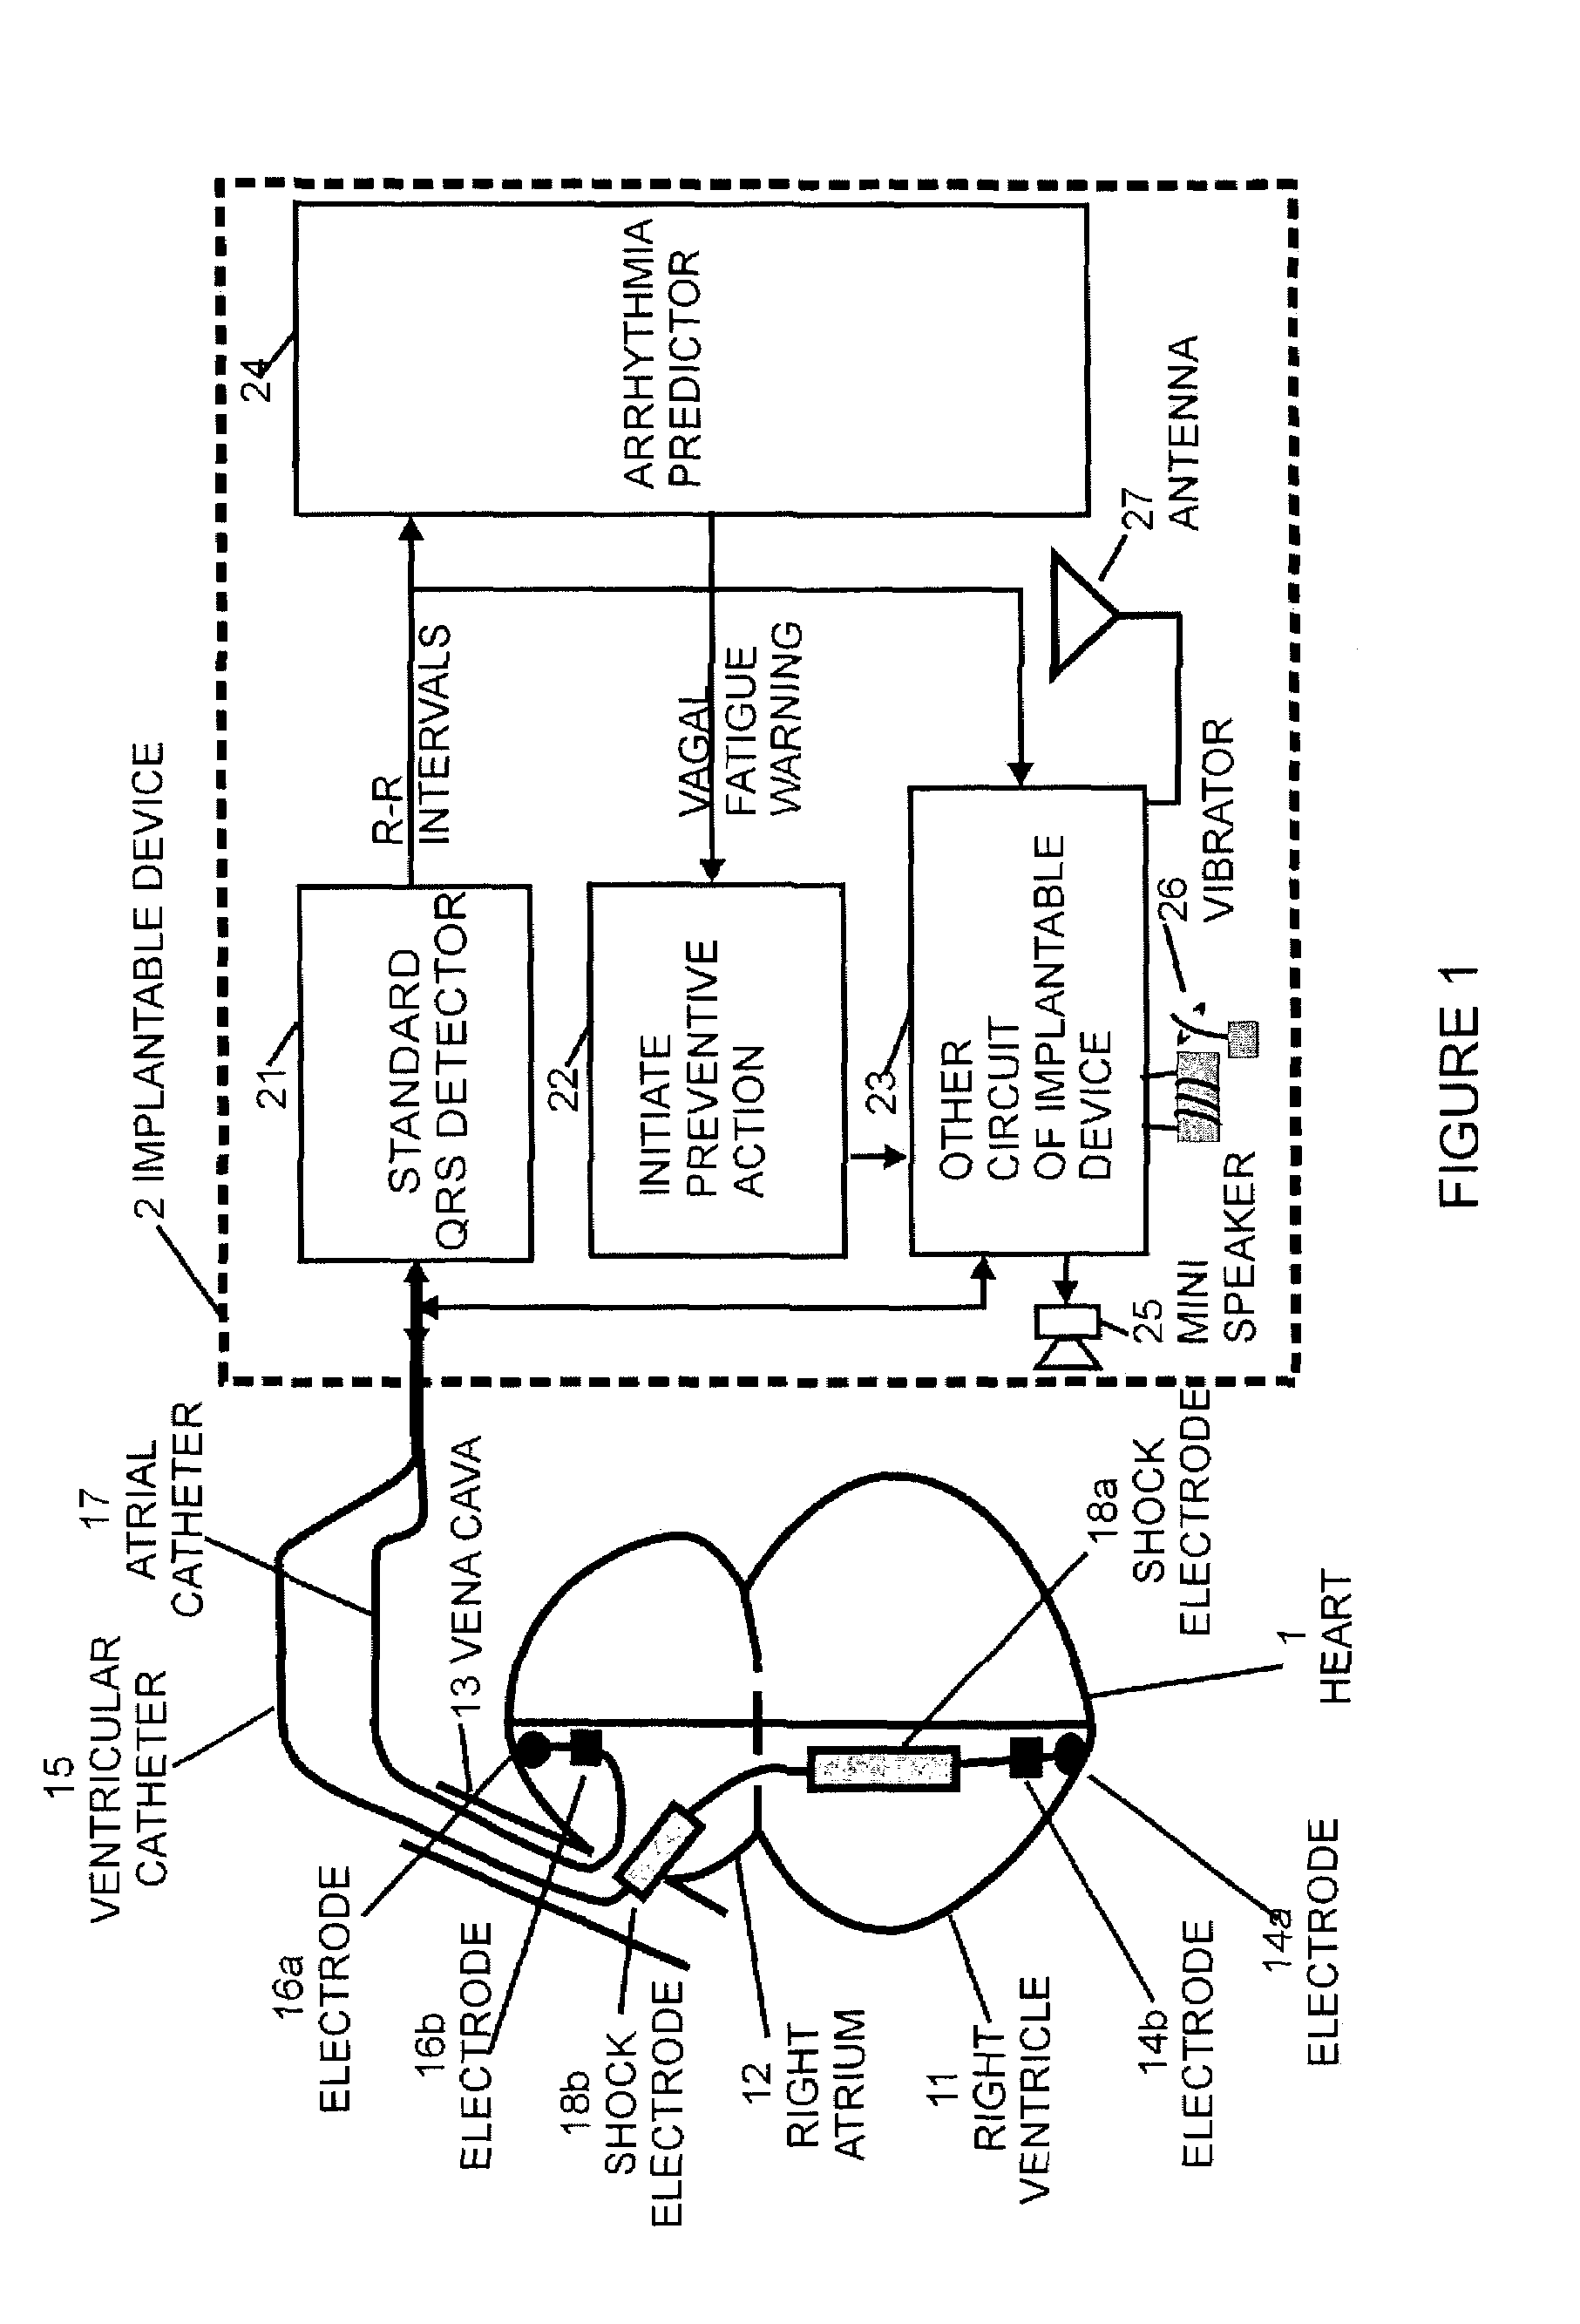 Method and apparatus for preventing heart tachyarrhythmia